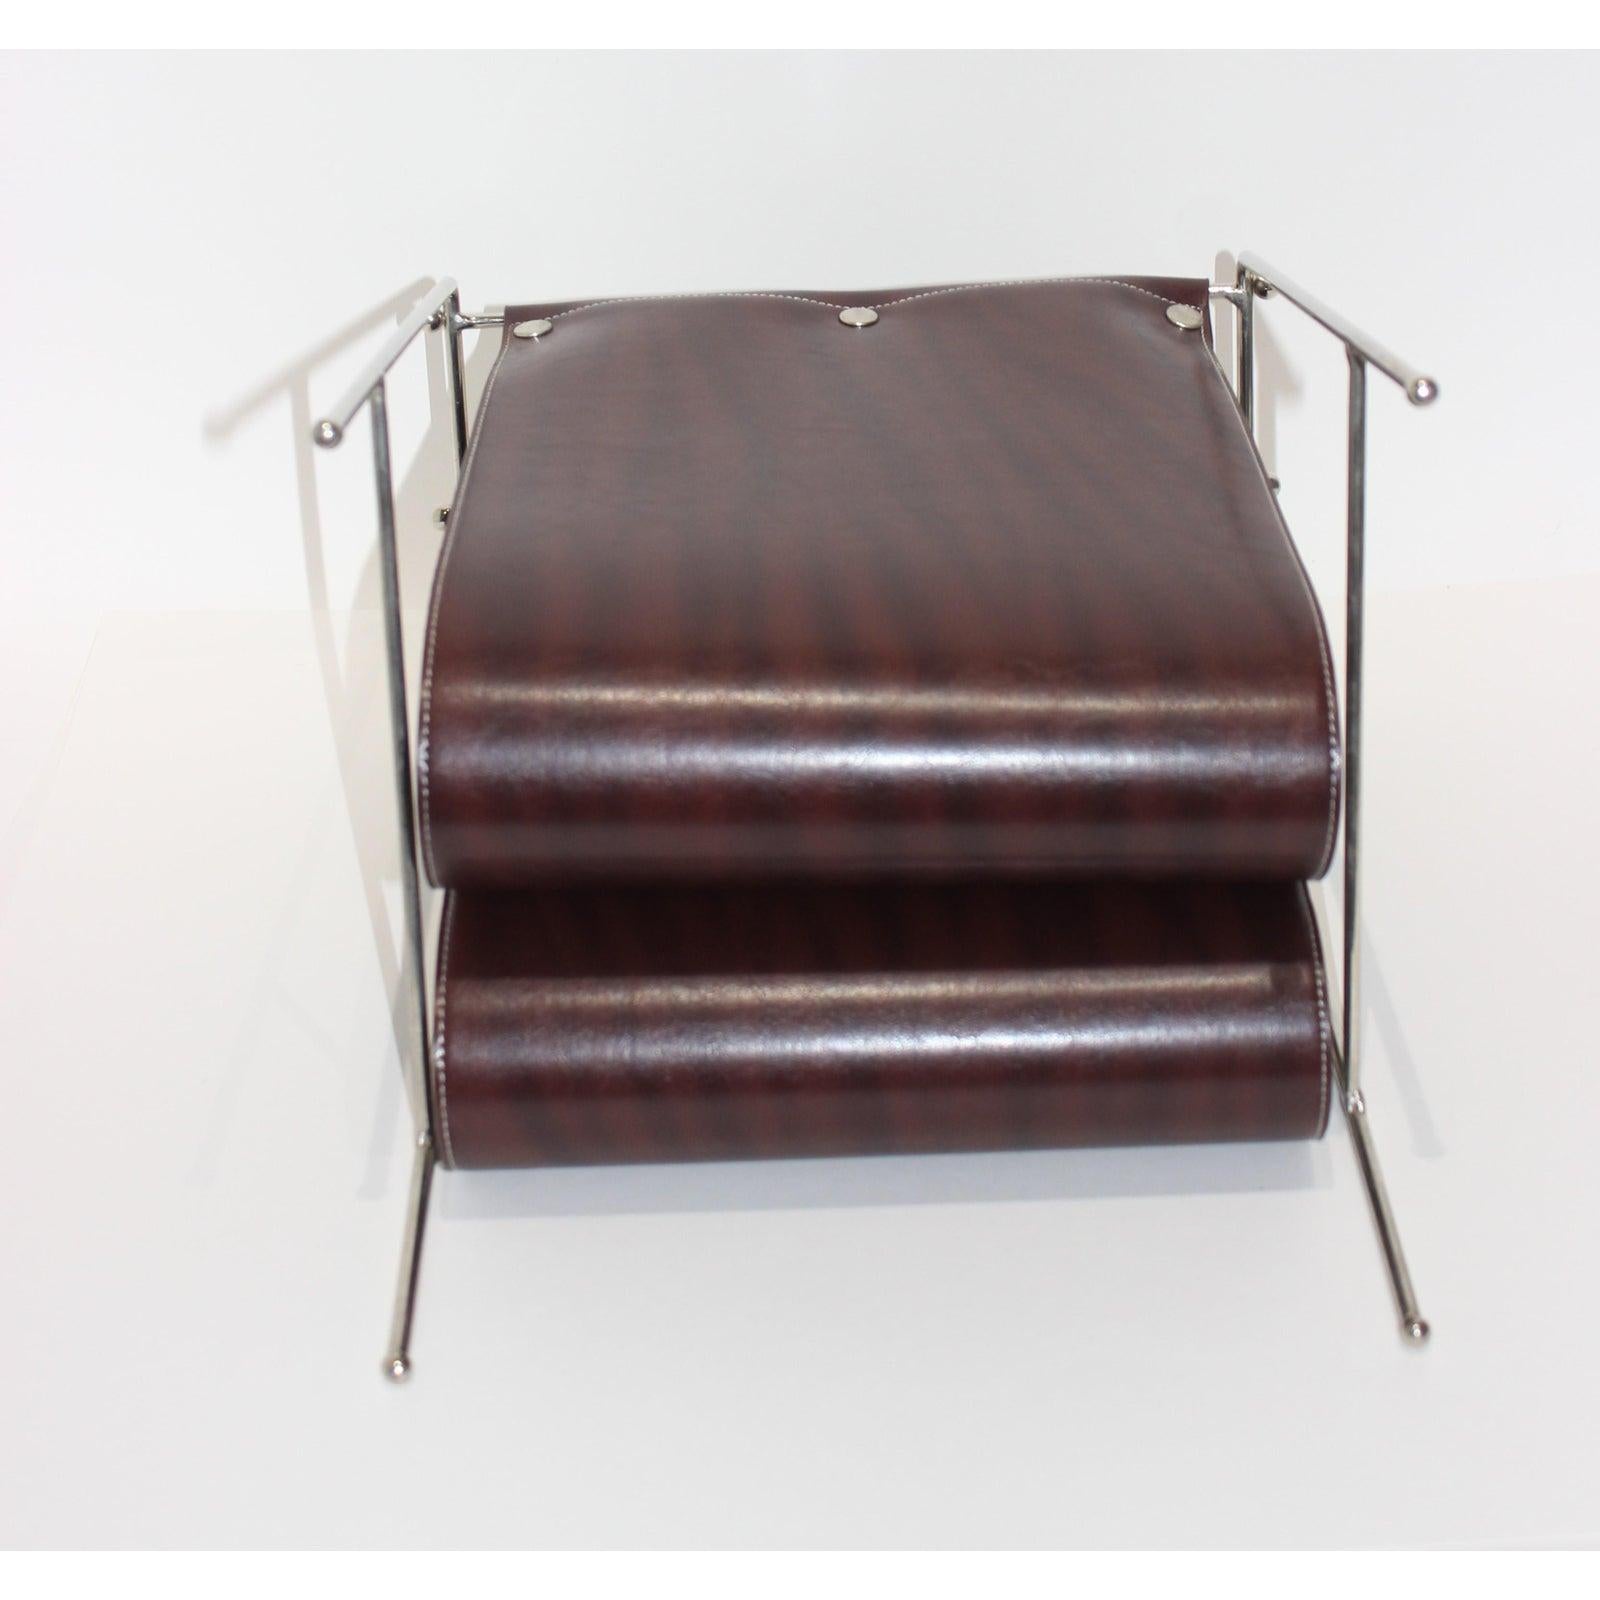 This stylish magazine holder is very much in the form of pieces created by Jacques Adnet and will hold all your favorite read's. The piece is fabricated in polished chrome and a brown colored vinyl (faux leather) fabric.